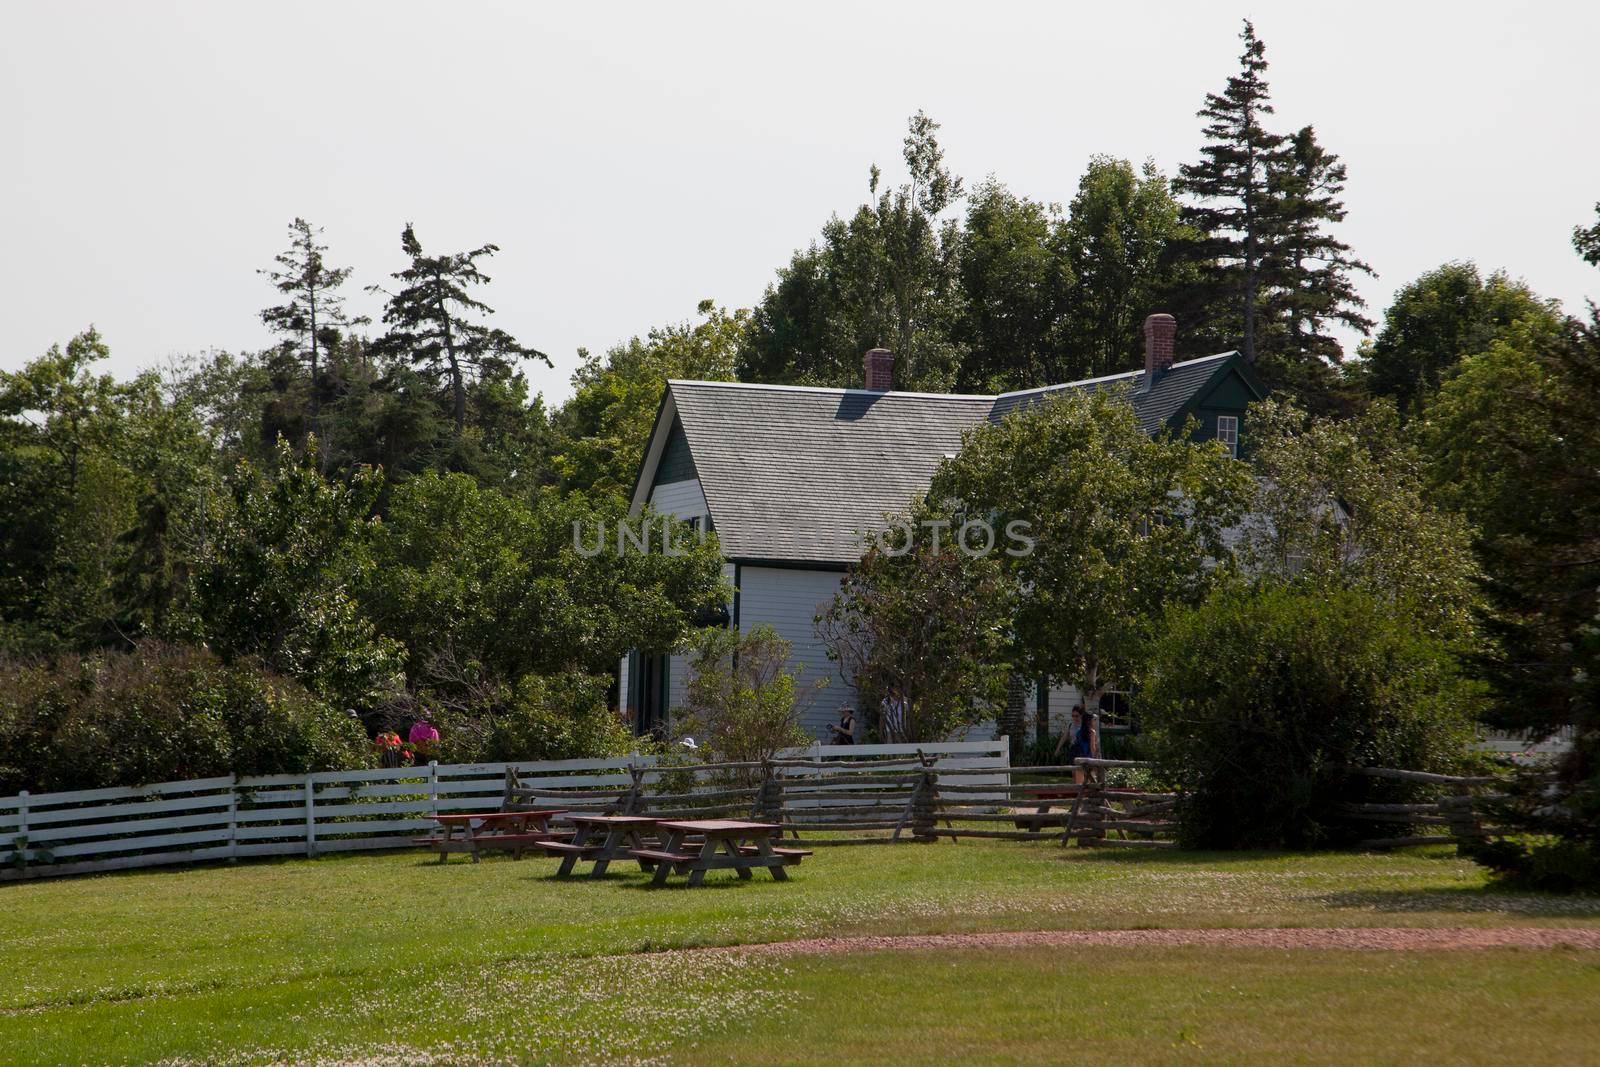 Tourists and picnic tables at Green Gables Place  by rustycanuck